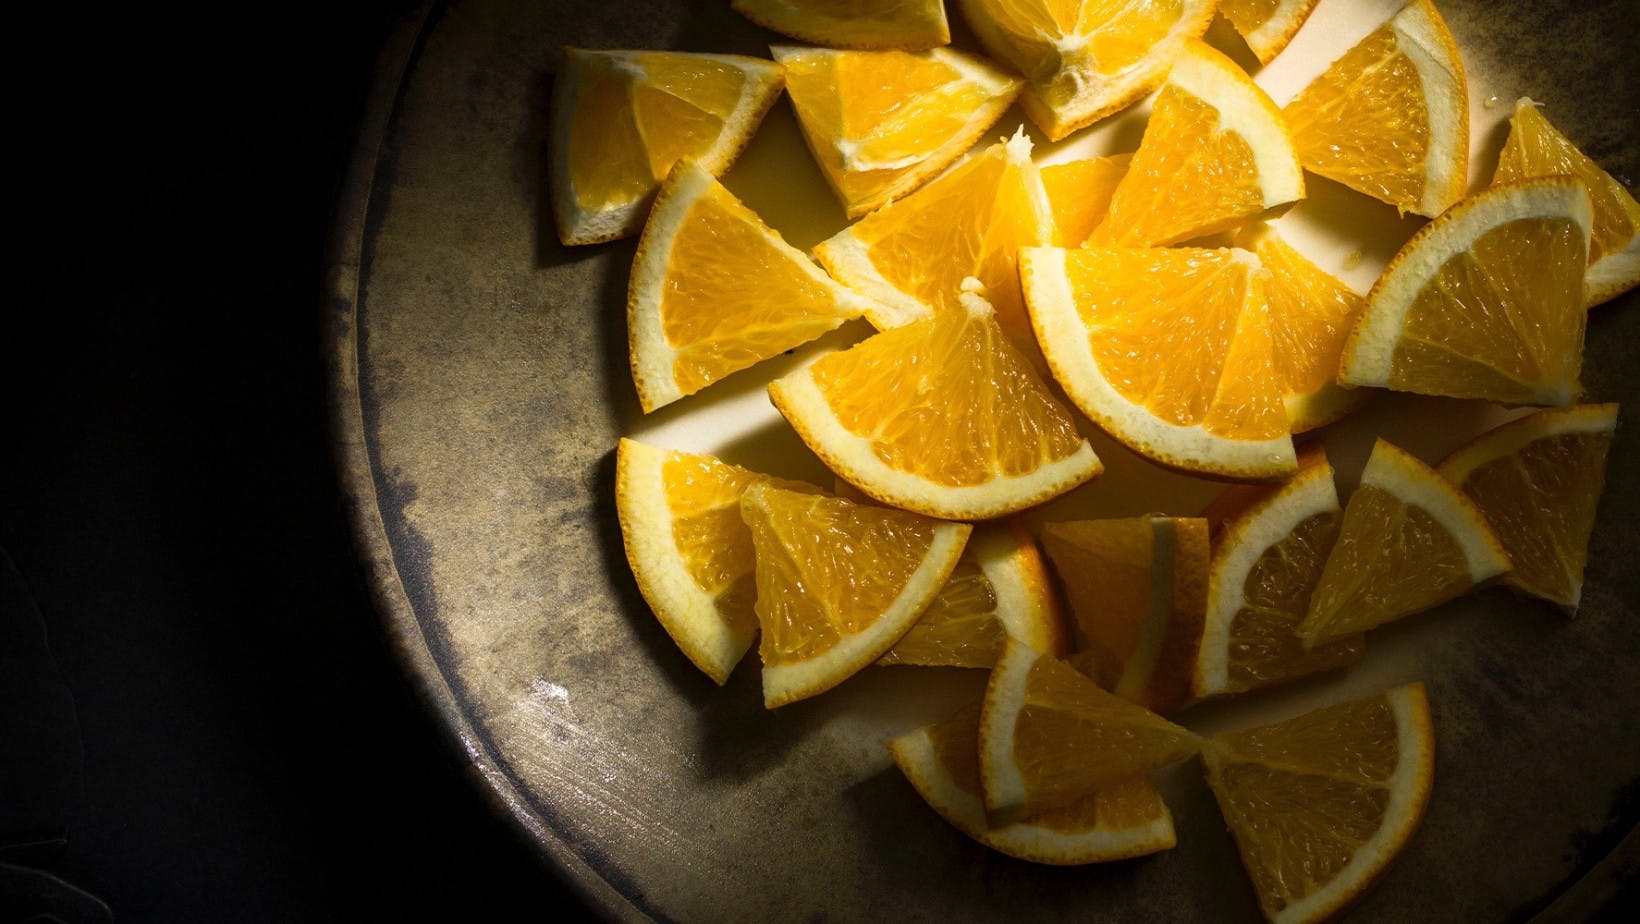 Evenly sliced oranges which help represent math and fractions